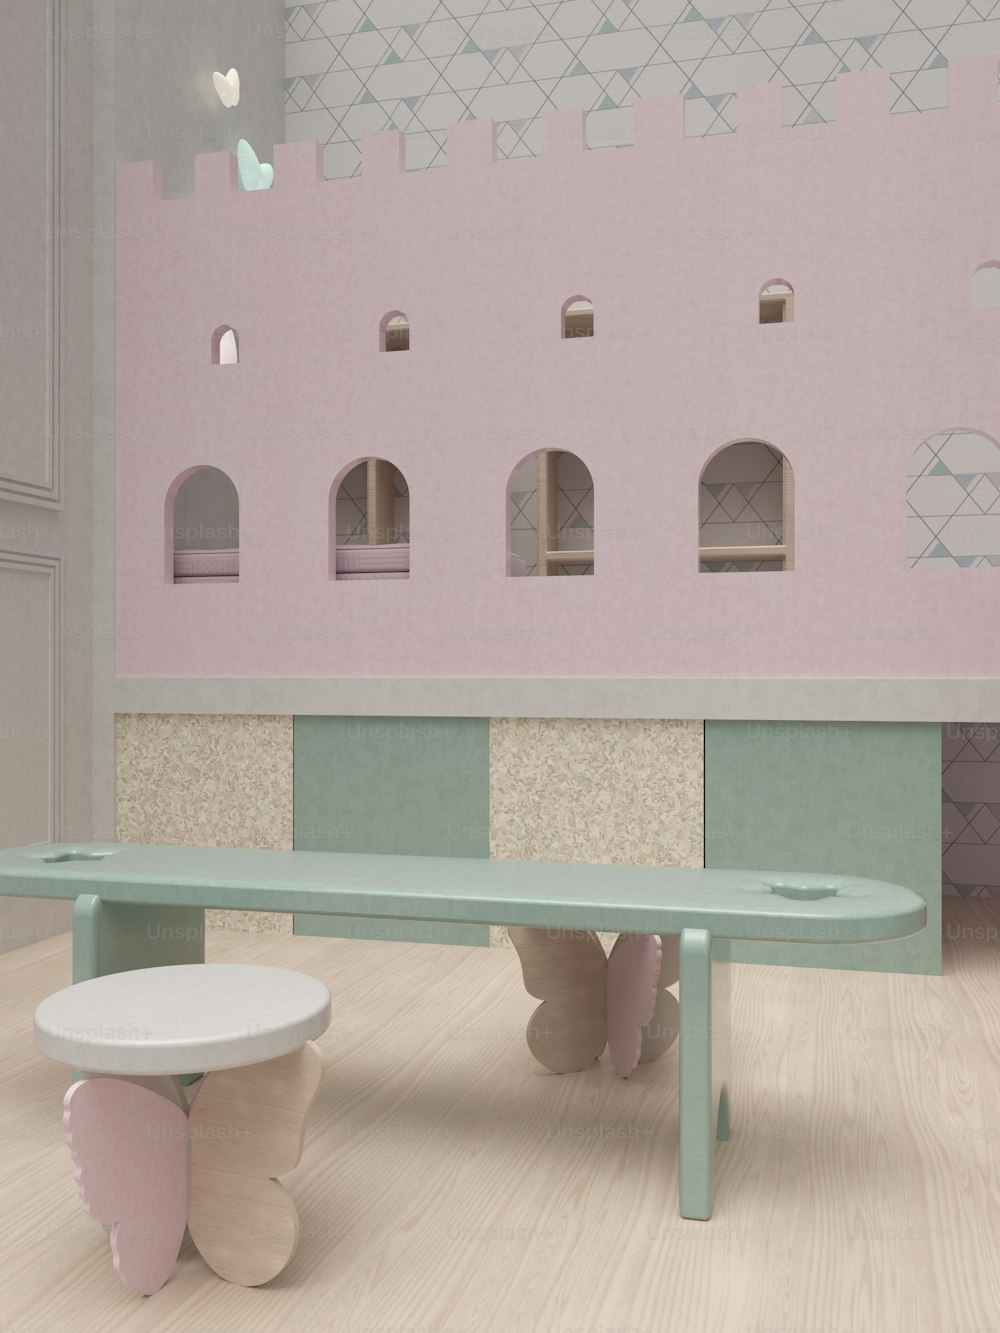 a bench and table in a room with a pink wall